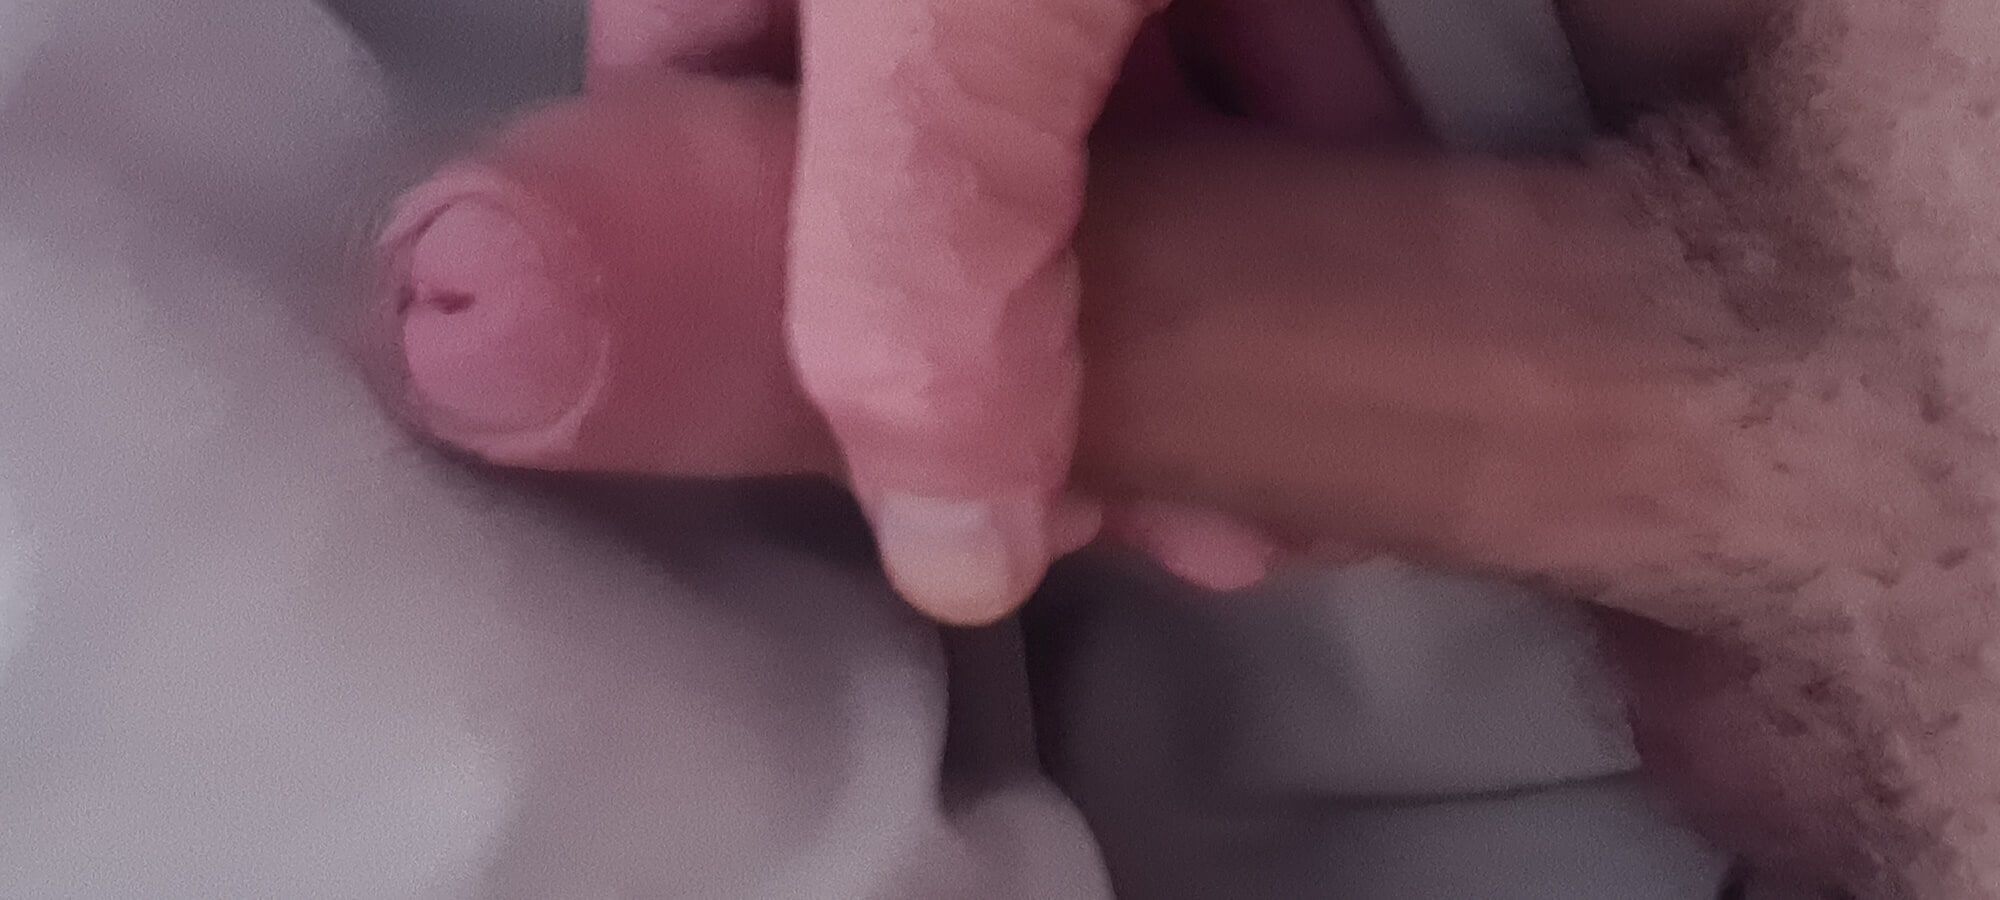 my cock and me #7